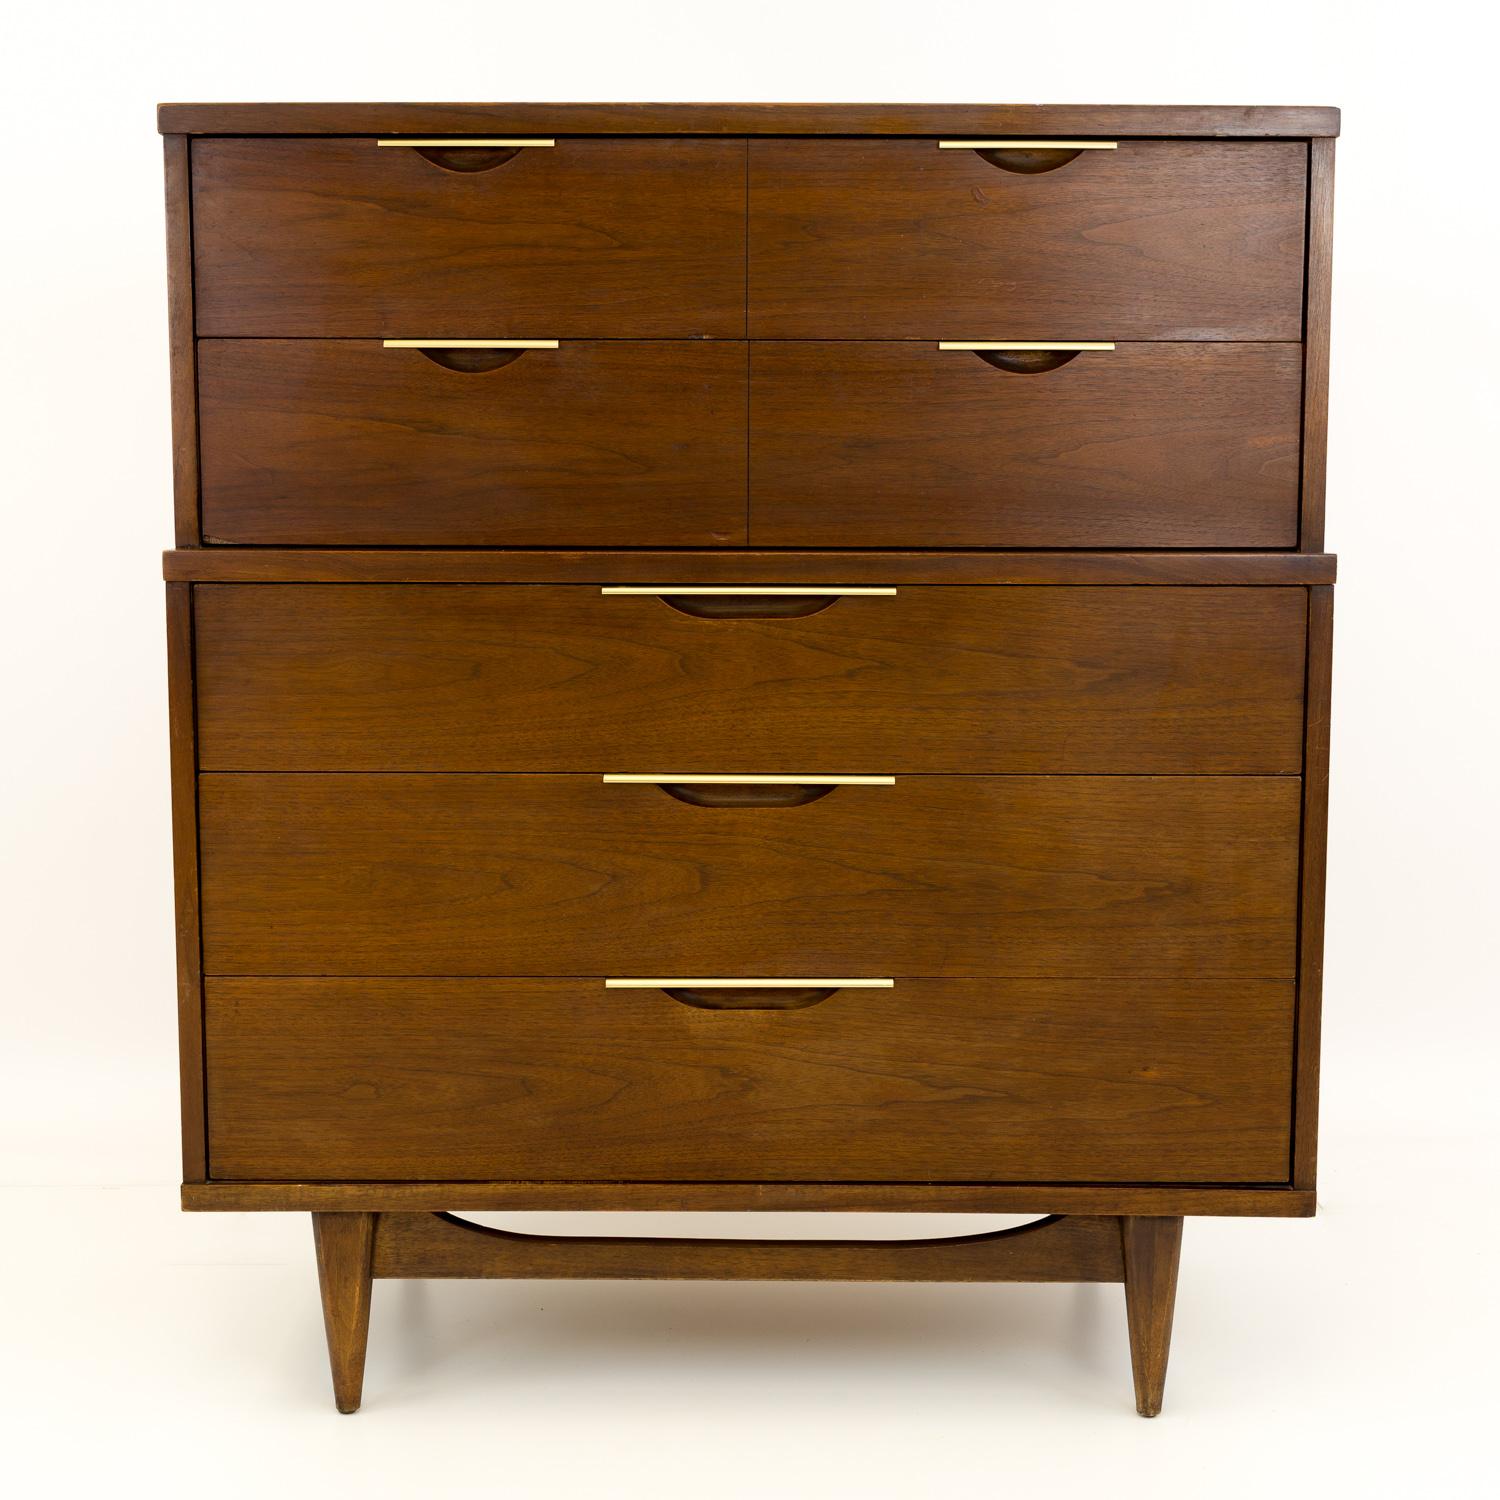 Kent Coffey Tableau Mid Century Walnut and Brass Highboy Dresser 

This dresser measures: 40 wide x 19 deep x 46.25 inches high.

All pieces of furniture can be had in what we call restored vintage condition. That means the piece is restored upon